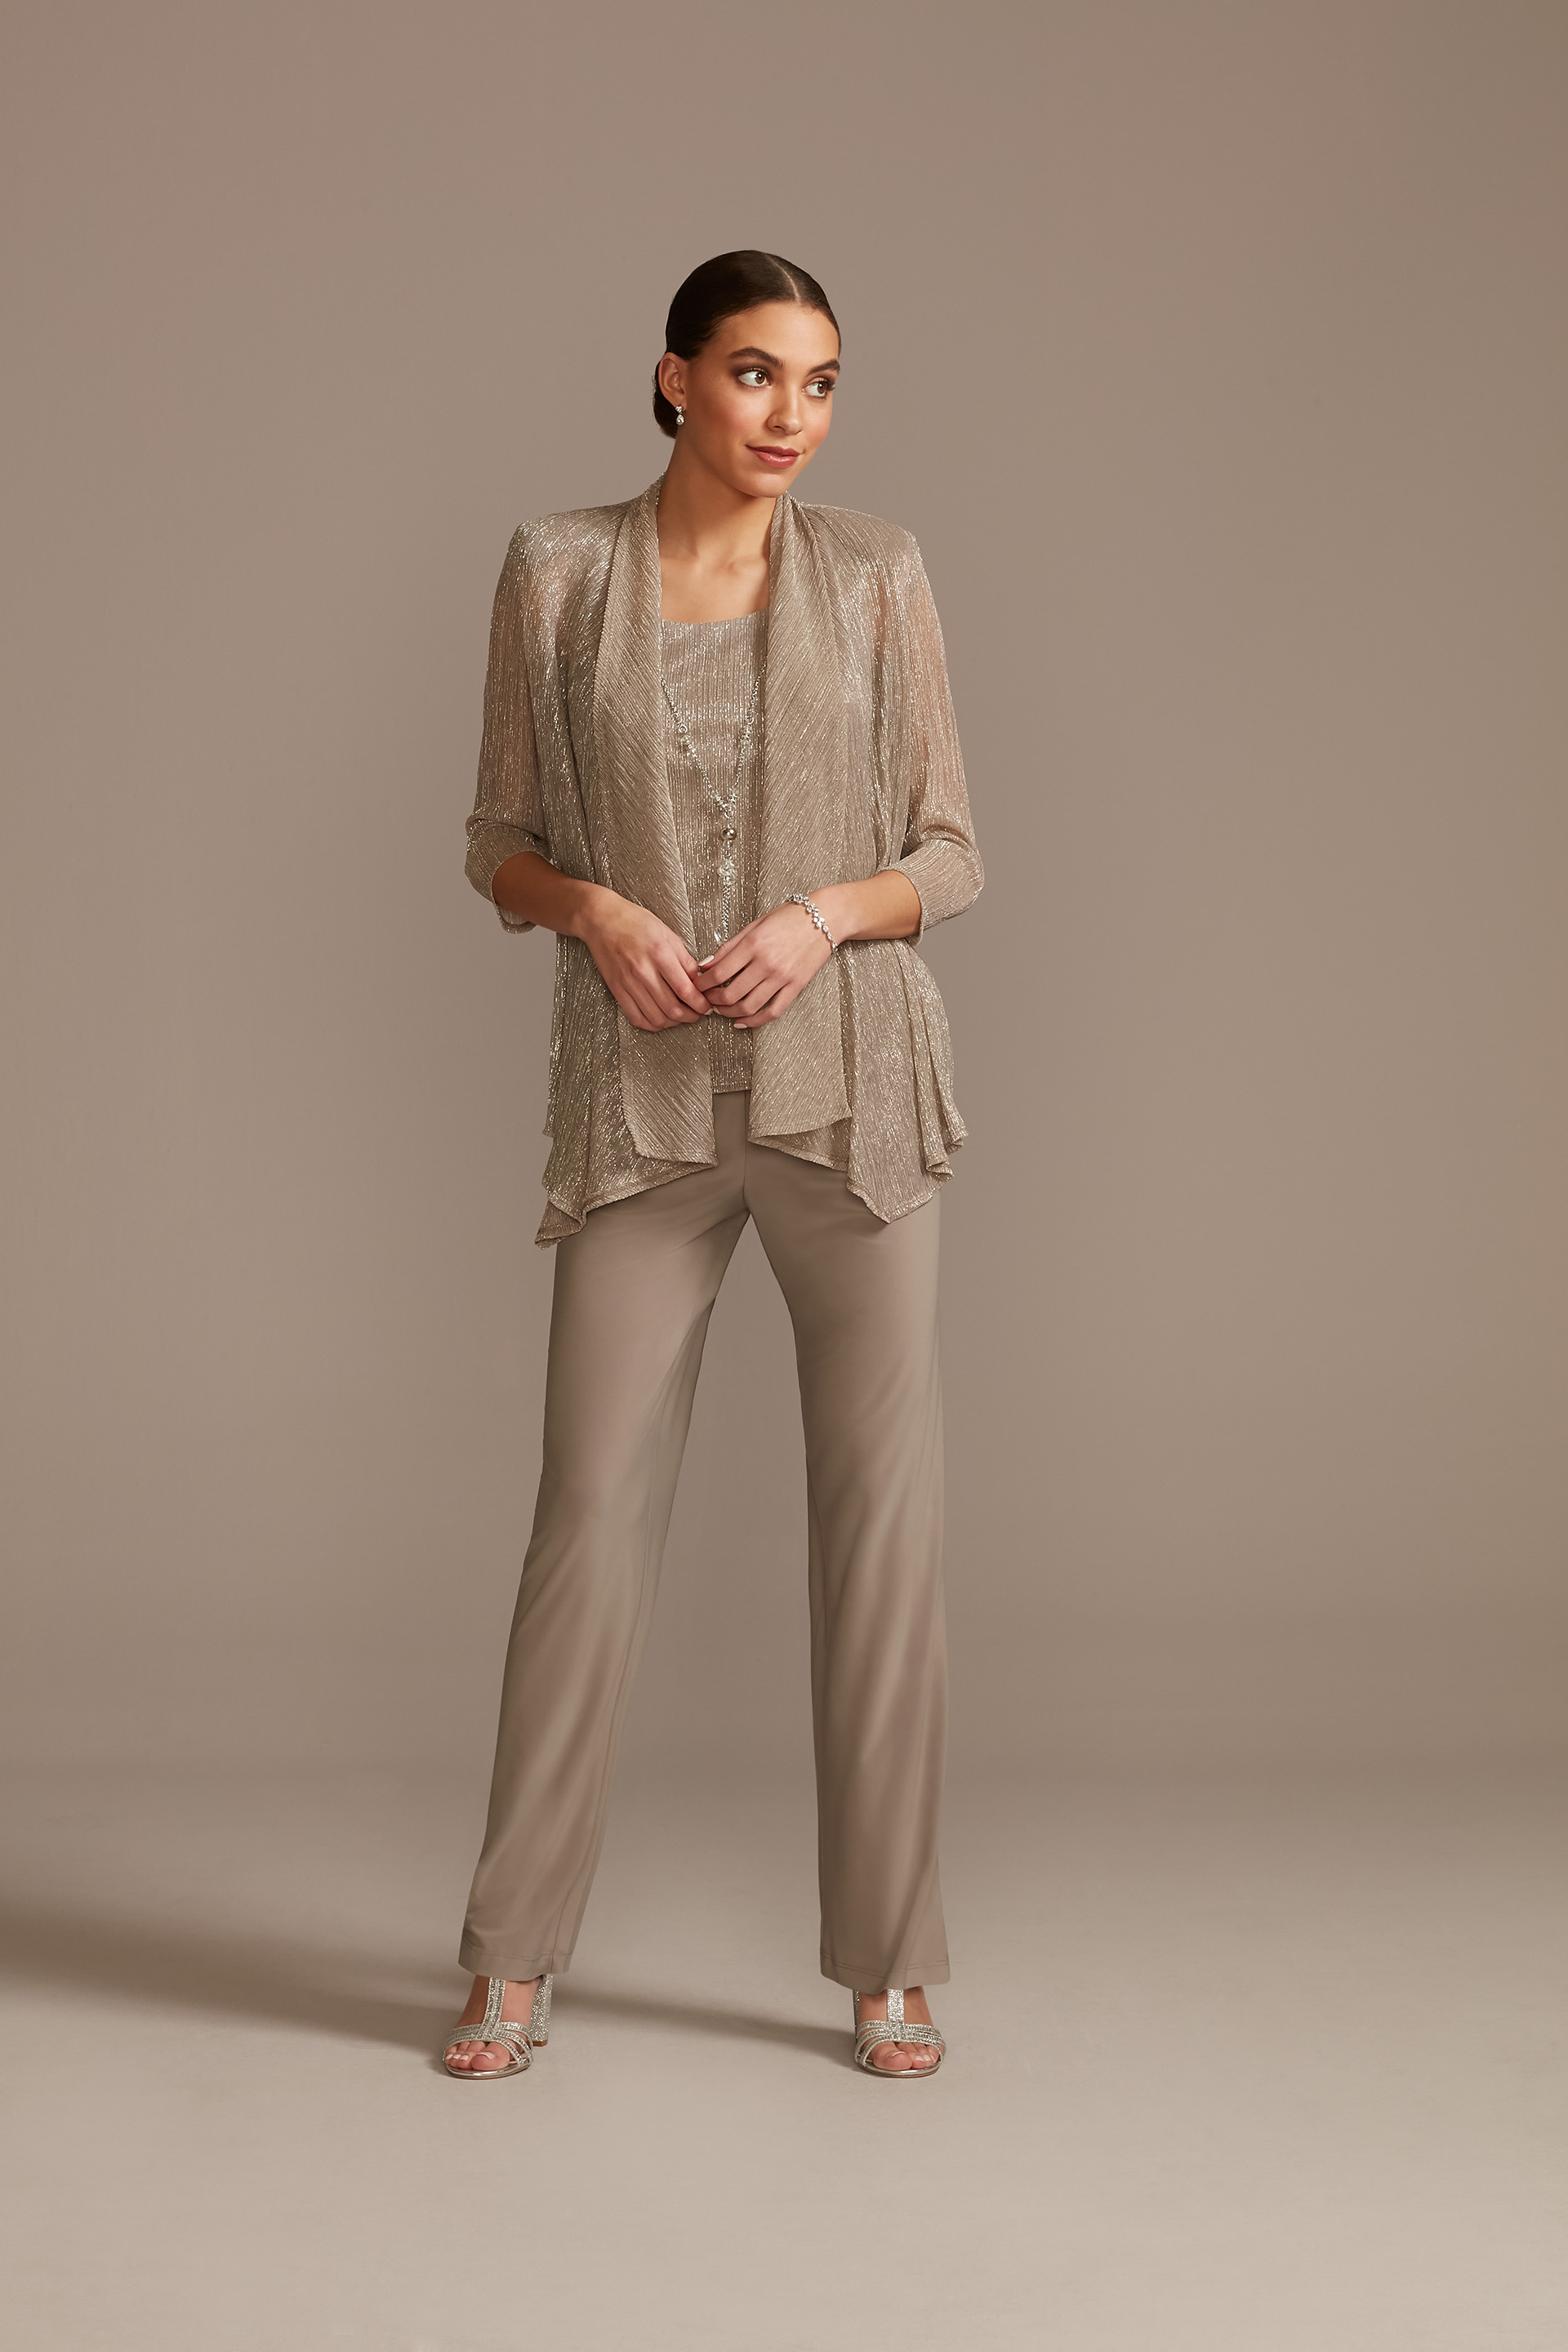 Mother of the Bride Pant Suits and Dresses You'll Love – Wedding